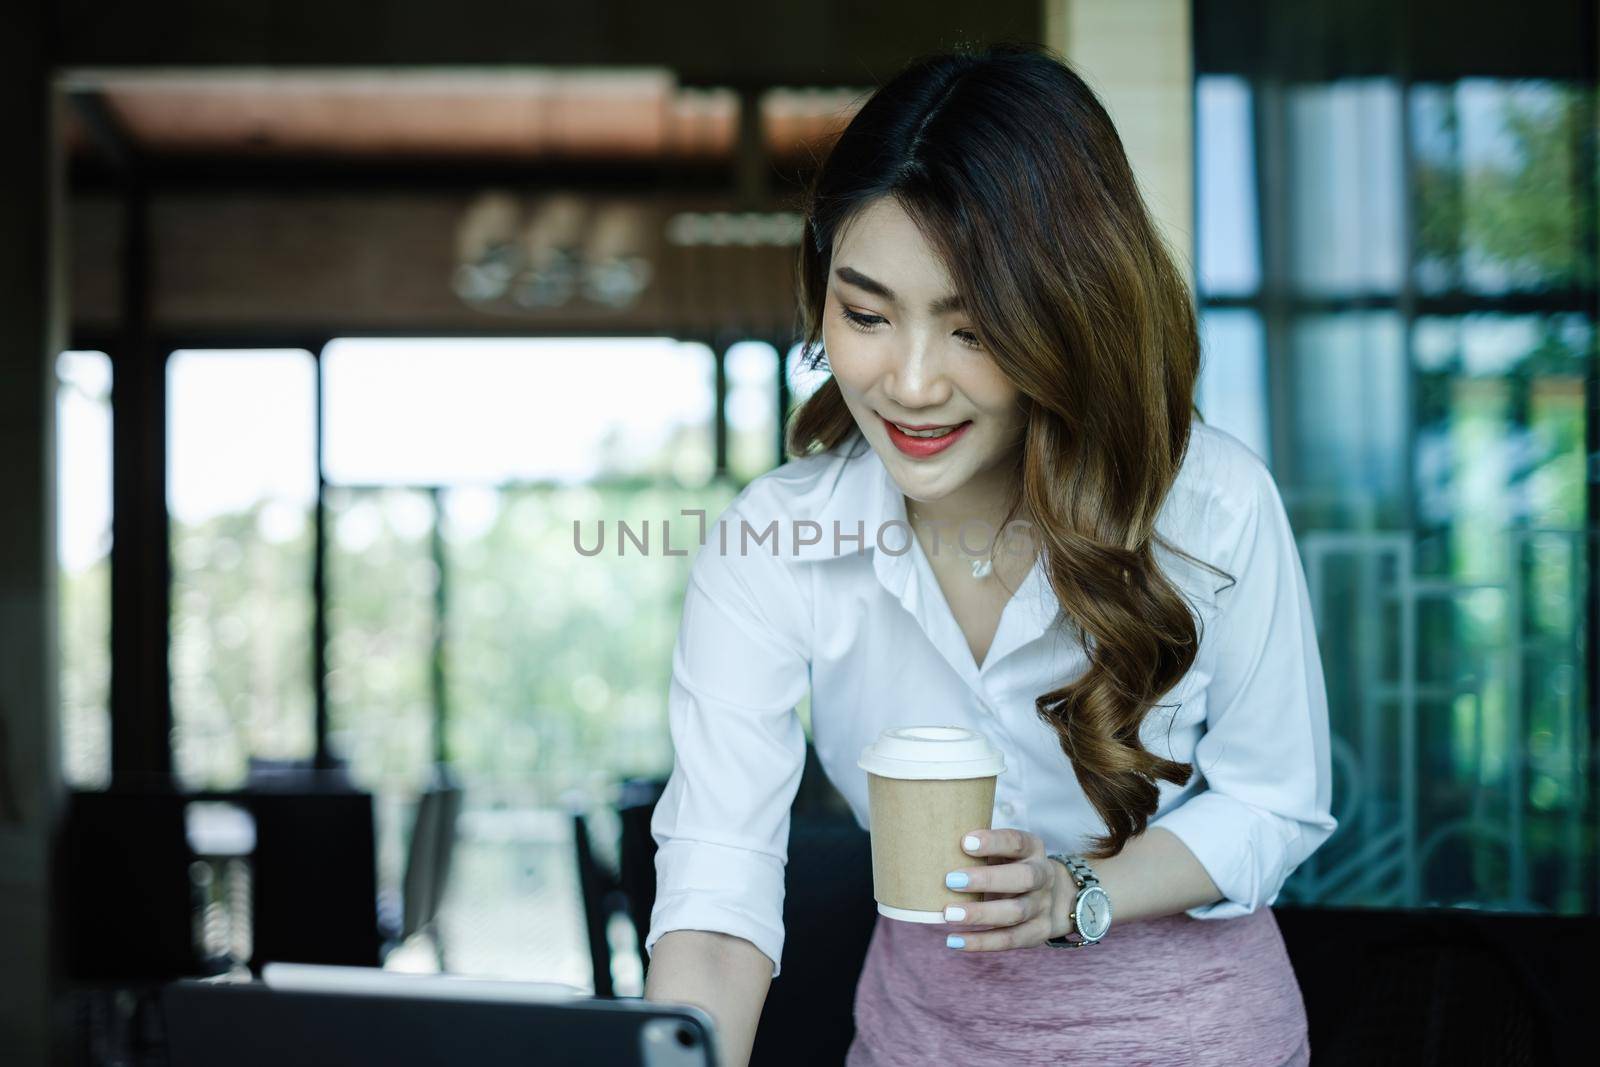 Businesswoman in having a video call on laptop while discussion with business partner during work from home